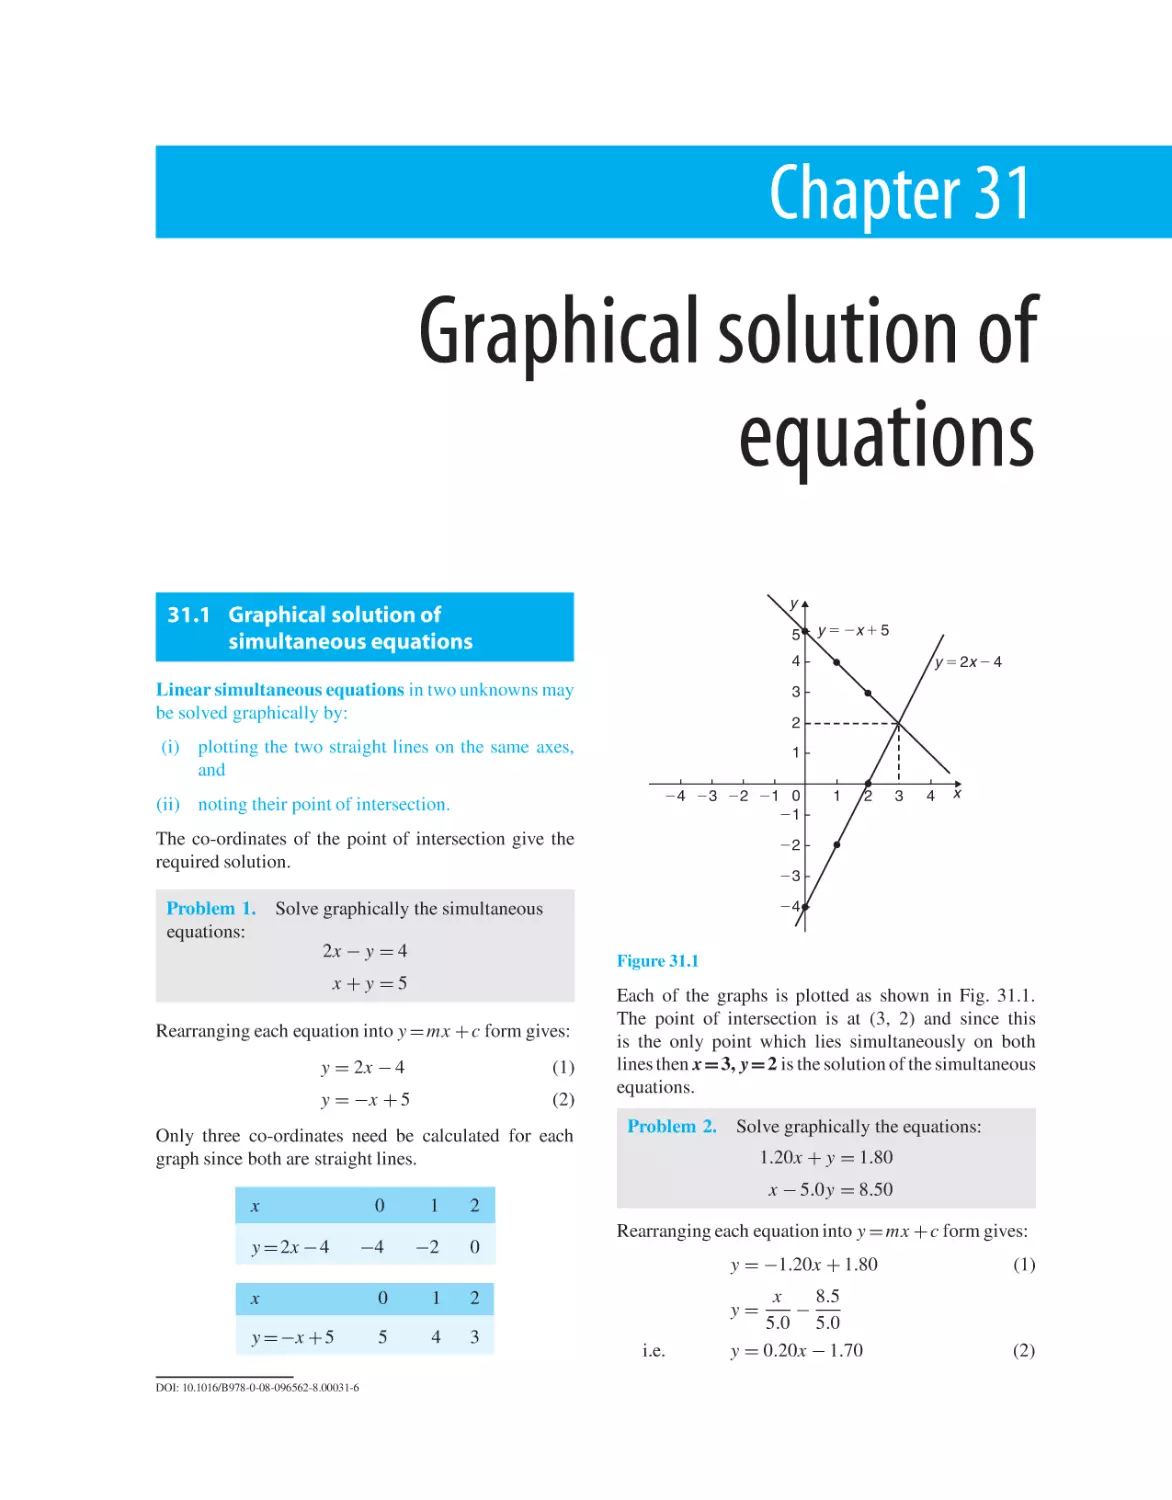 Chapter 31. Graphical solution of equations
31.1 Graphical solution of simultaneous equations